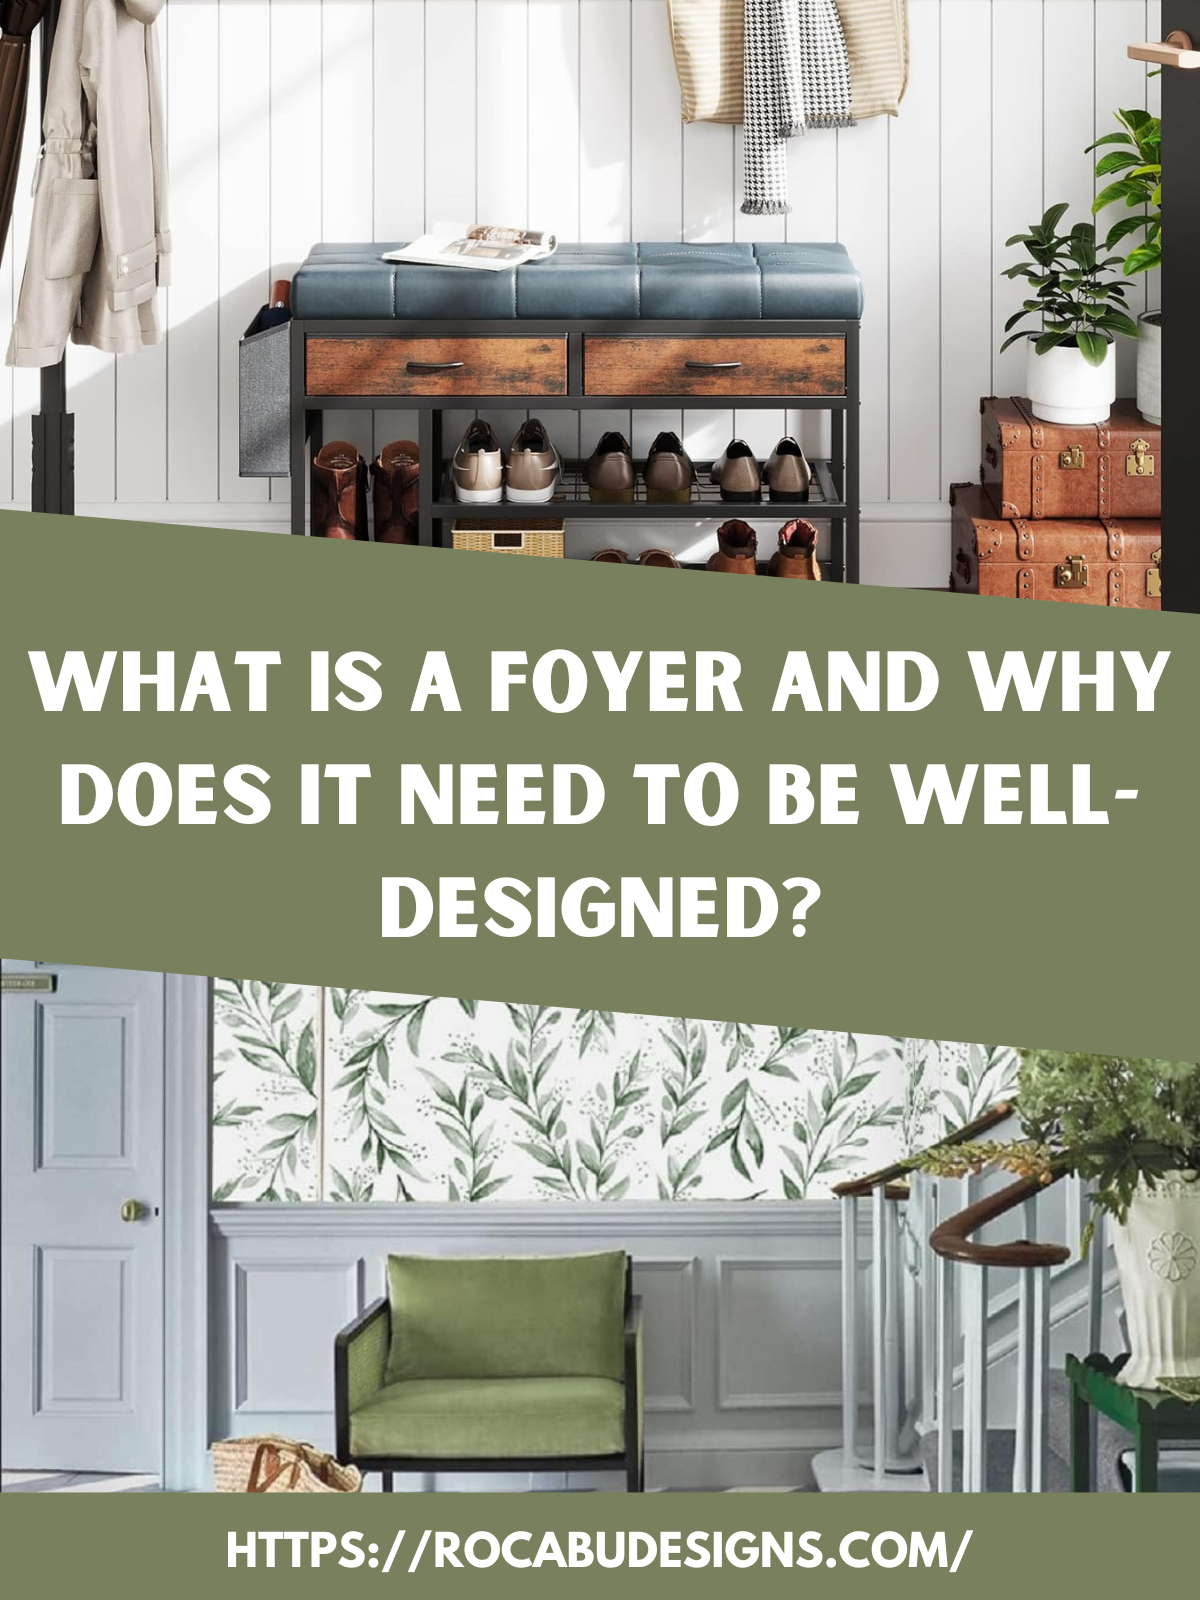 What Is A Foyer And Why Does It Need To Be Well-Designed?